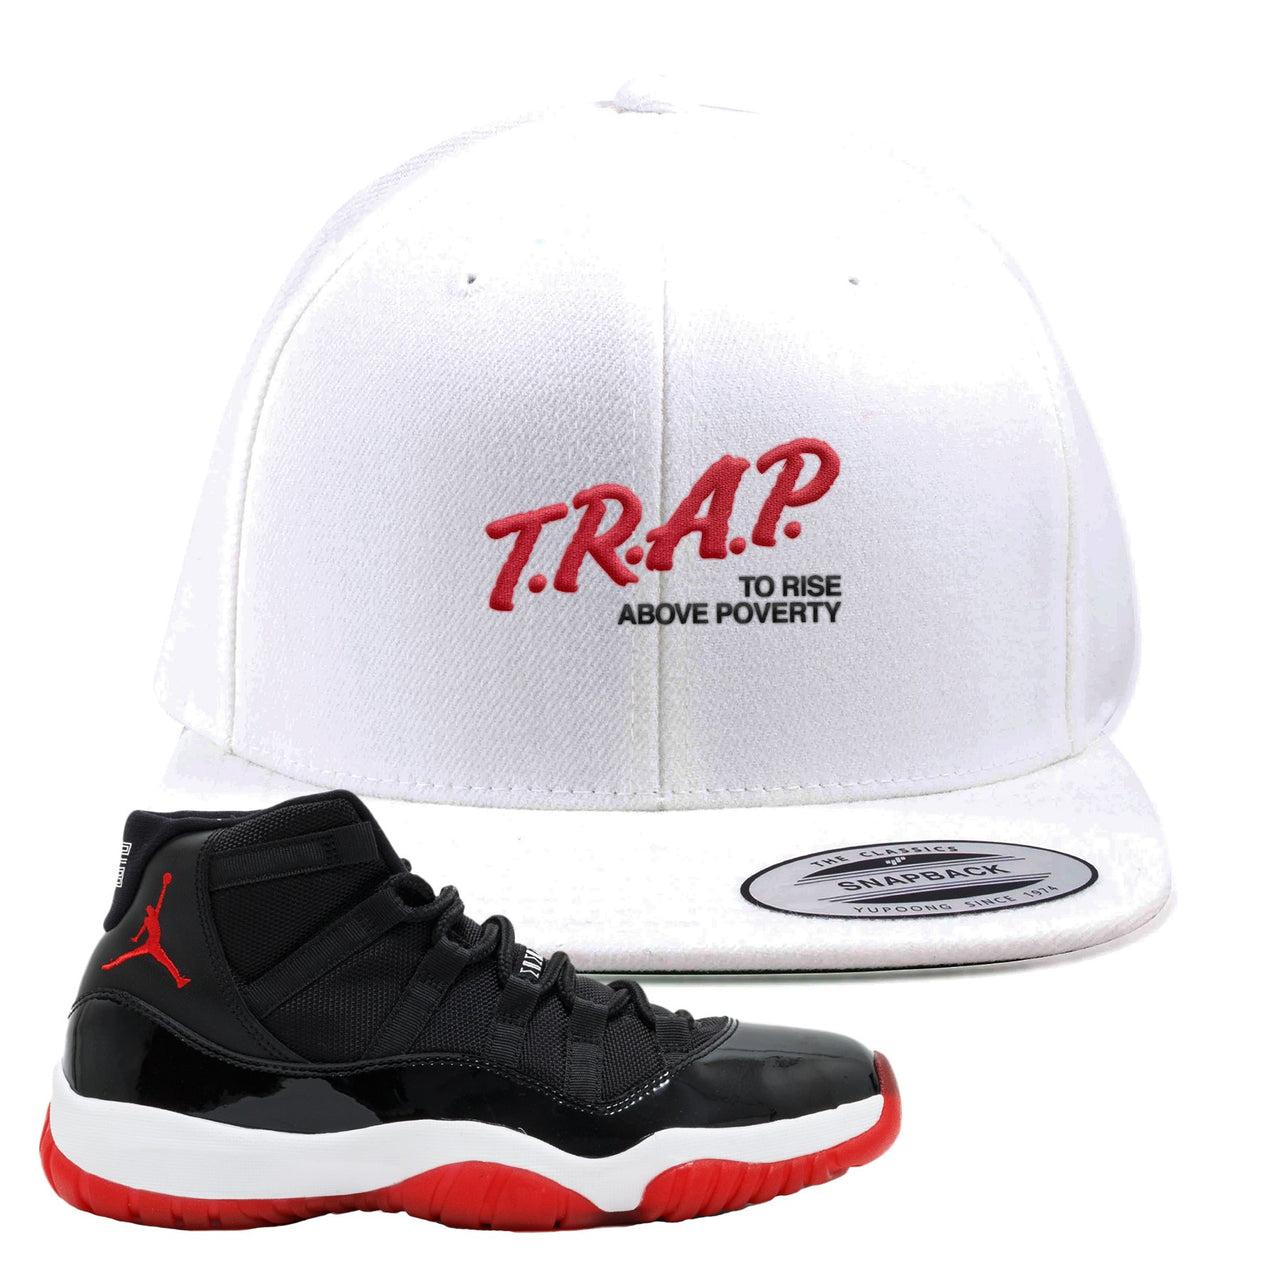 Jordan 11 Bred Trap To Rise Above Poverty White Sneaker Hook Up Snapback Hat